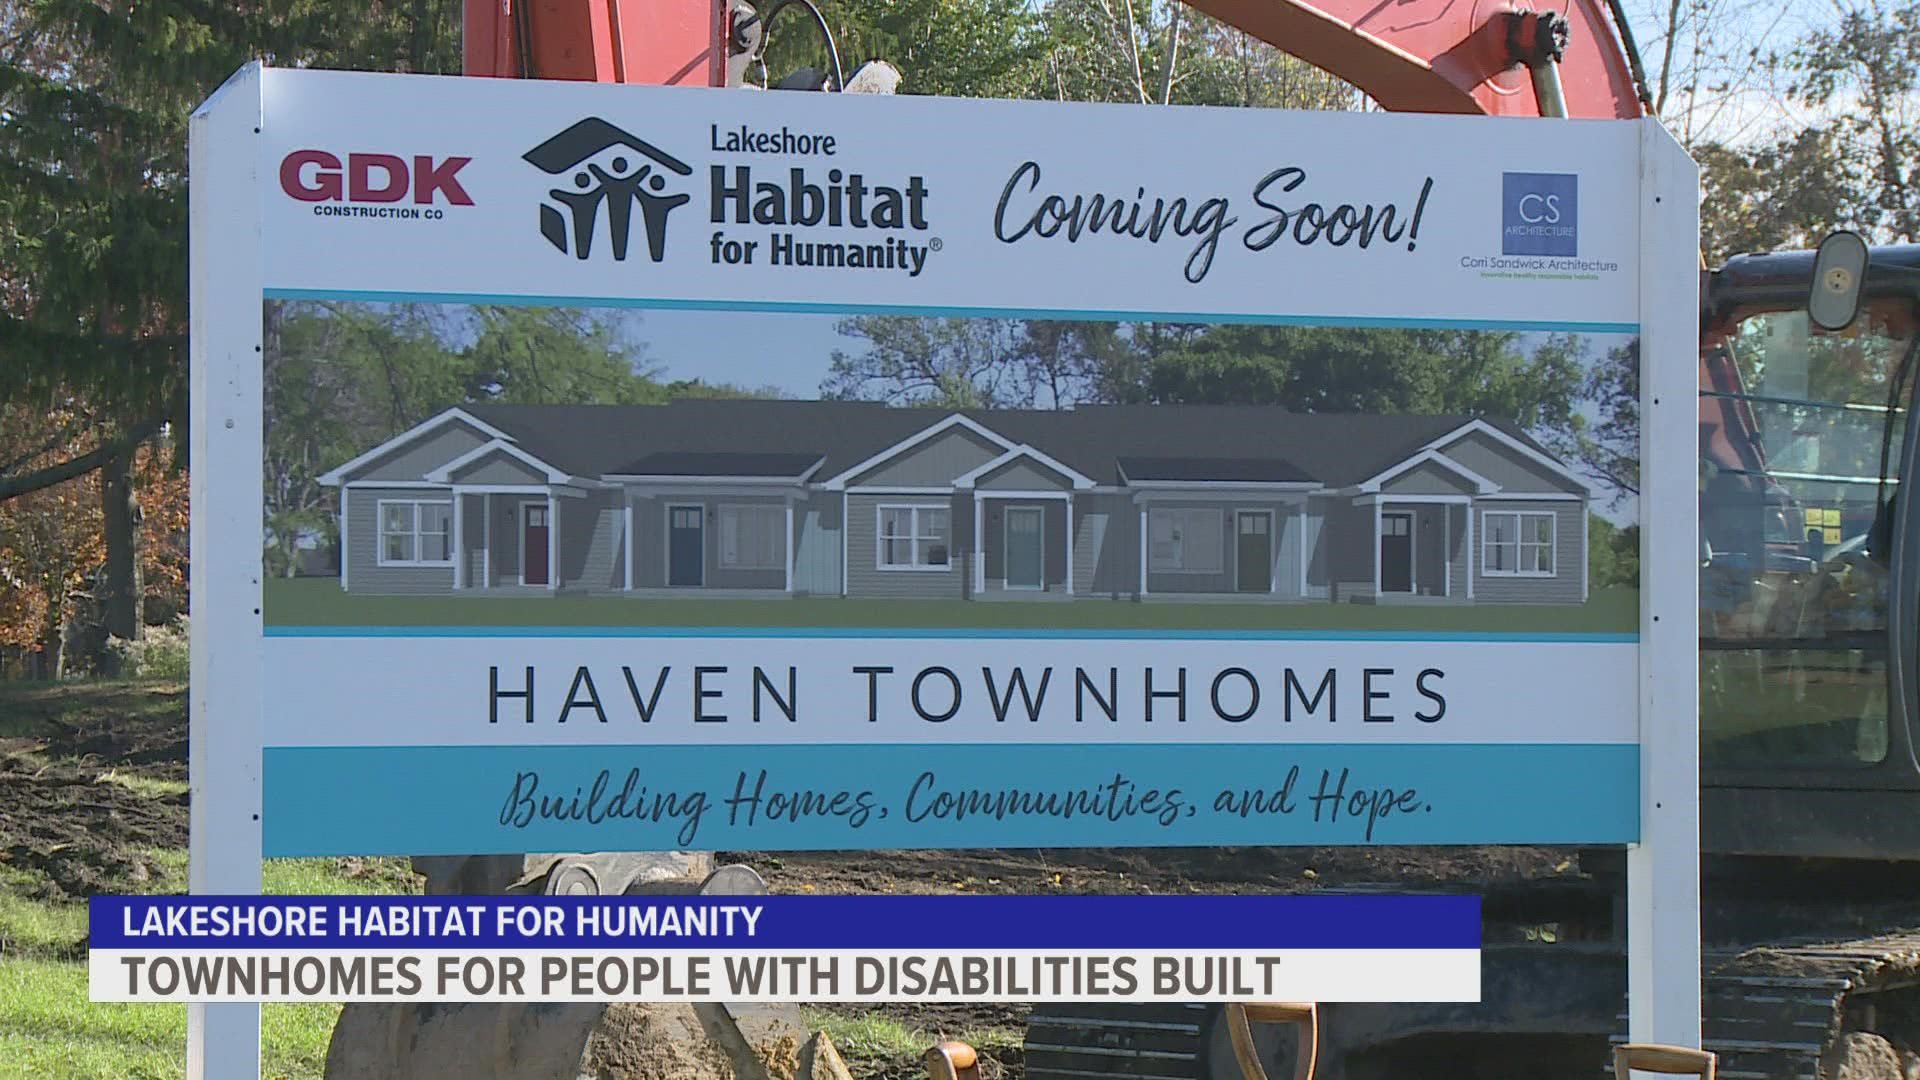 A new housing development built for people with disabilities is coming to Holland.